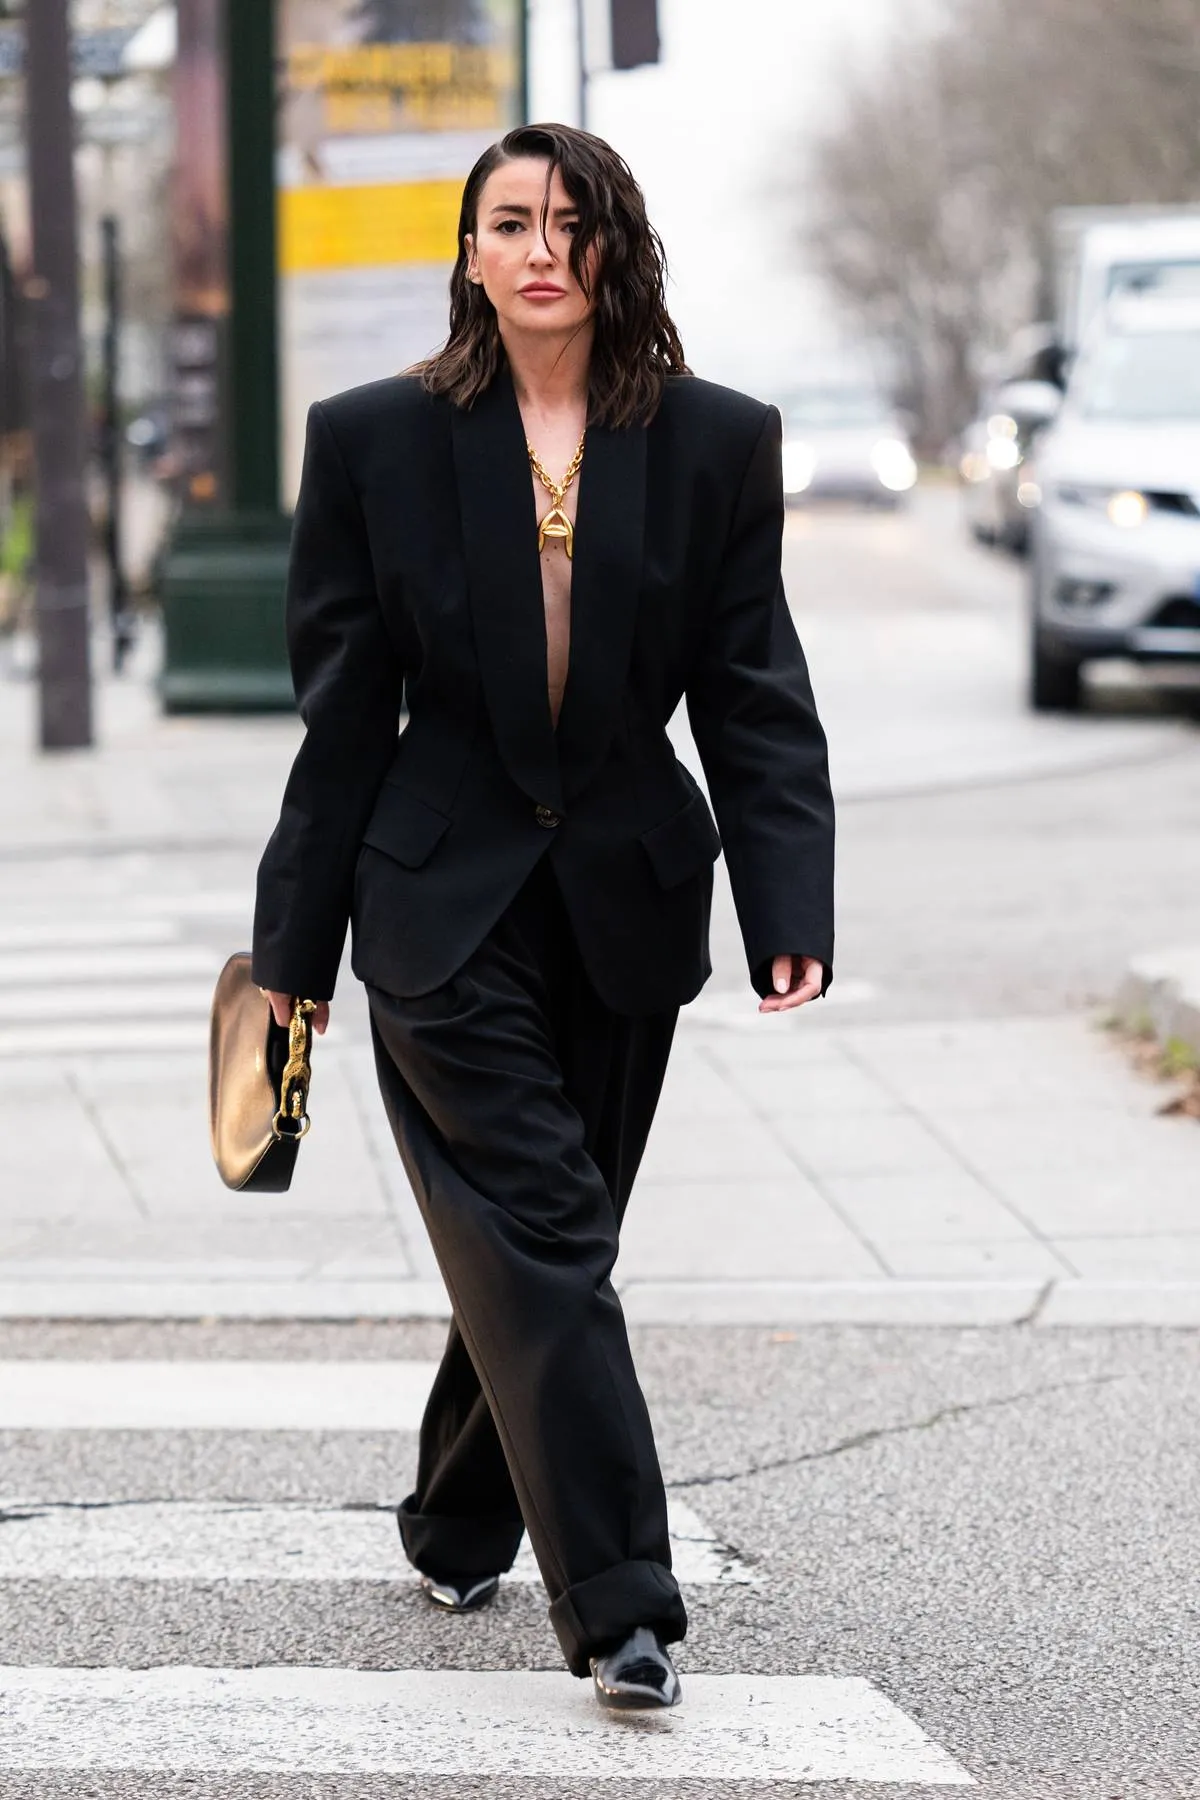 PARIS, FRANCE - JANUARY 24: Alexandra Pereira wears a black suit with oversize blazer and black bag, outside Alexandre Vauthier, during Paris Fashion Week - Menswear Fall-Winter 2023-2024, on January 24, 2023 in Paris, France. (Photo by